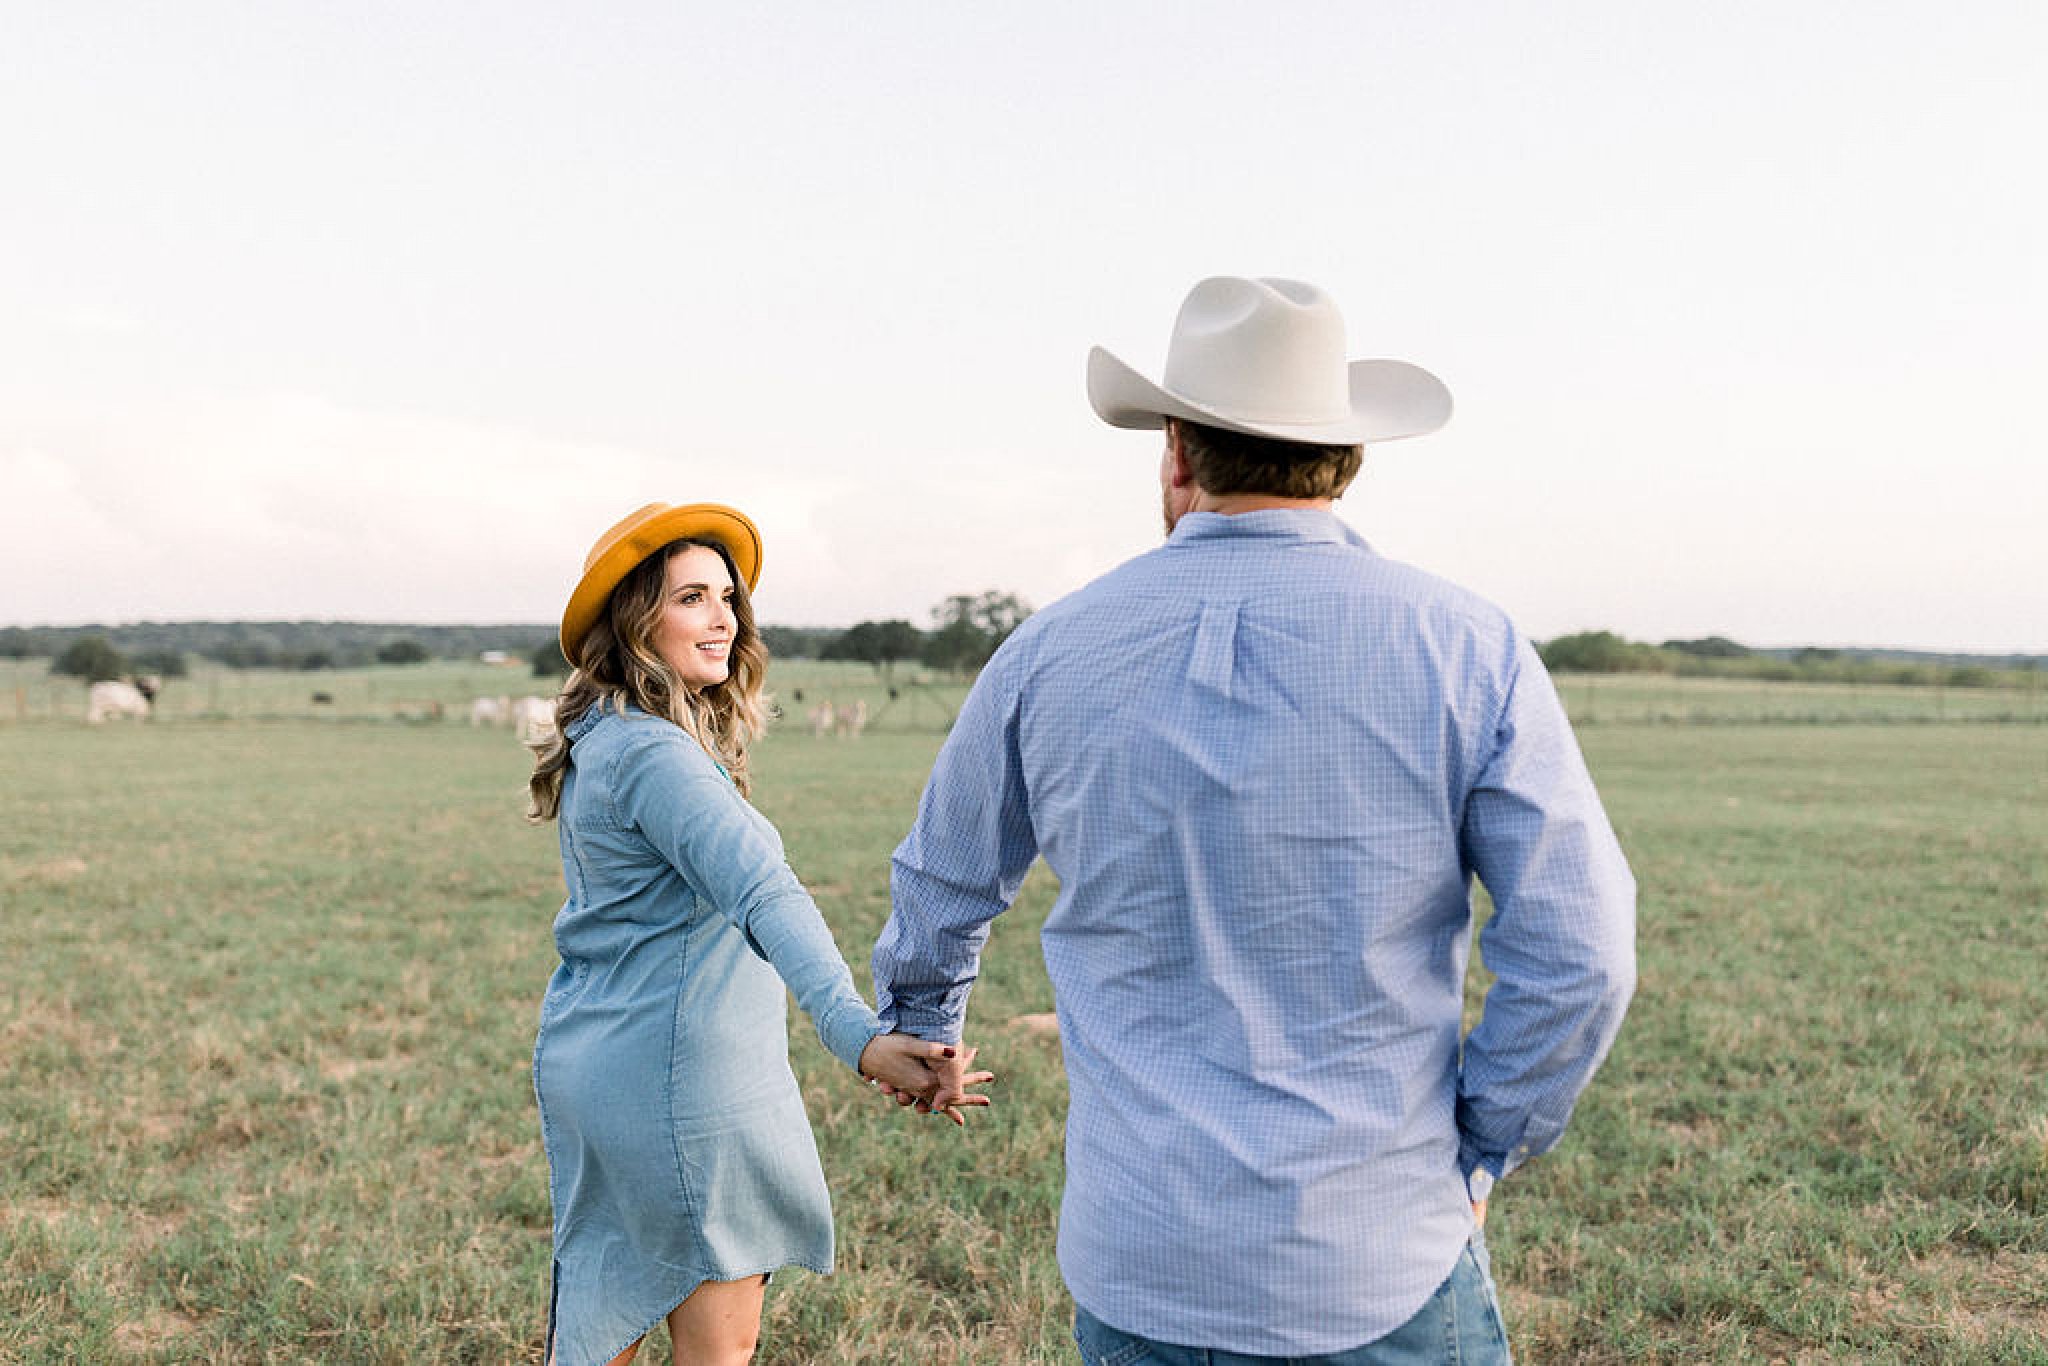 Engagement Session at the Farm, Texas Wedding Photographer, Anna Kay Photography